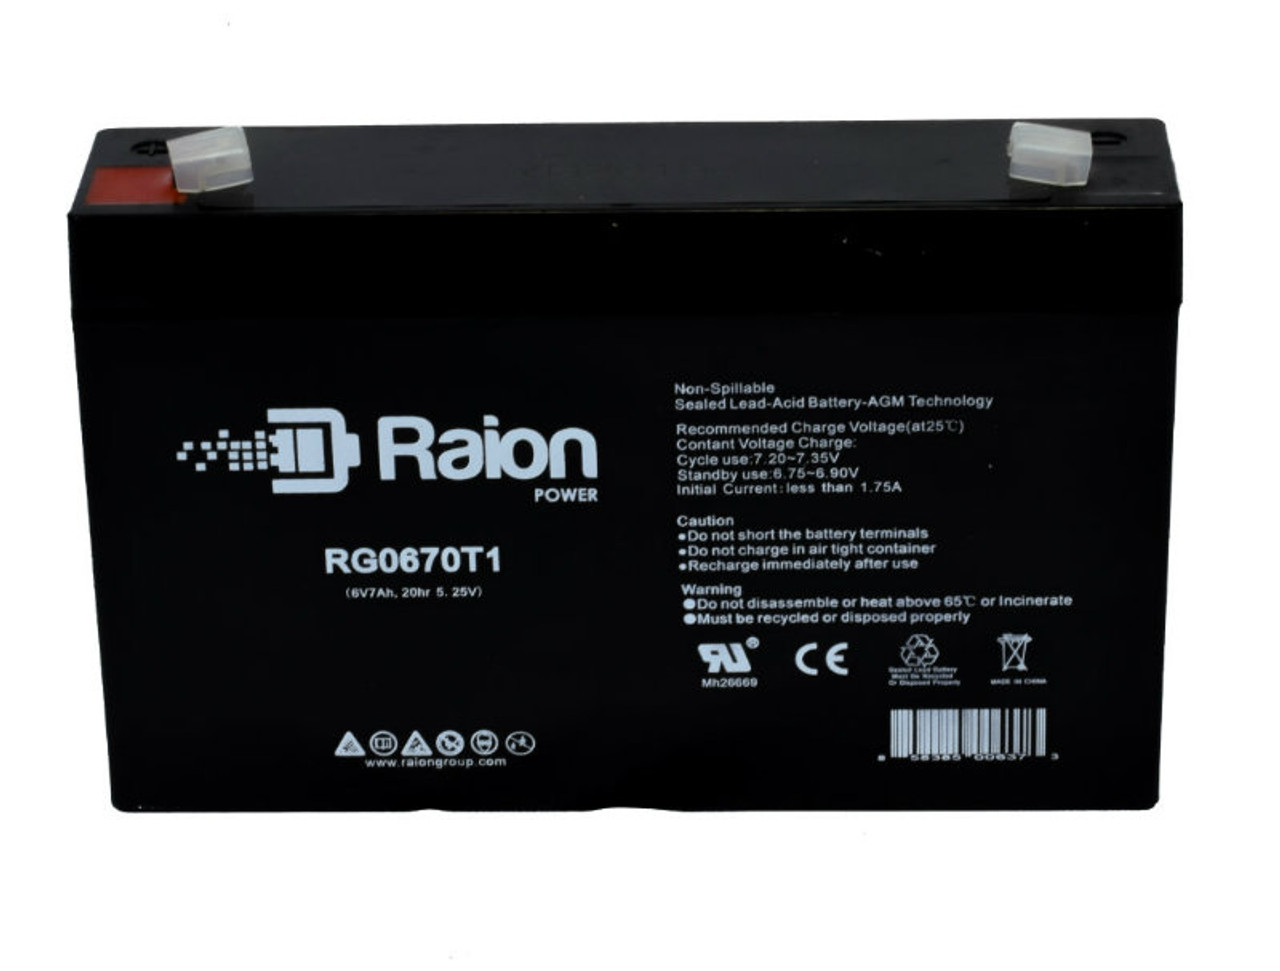 Raion Power RG0670T1 Replacement Battery Cartridge for Pace Tech Vitalsign 603